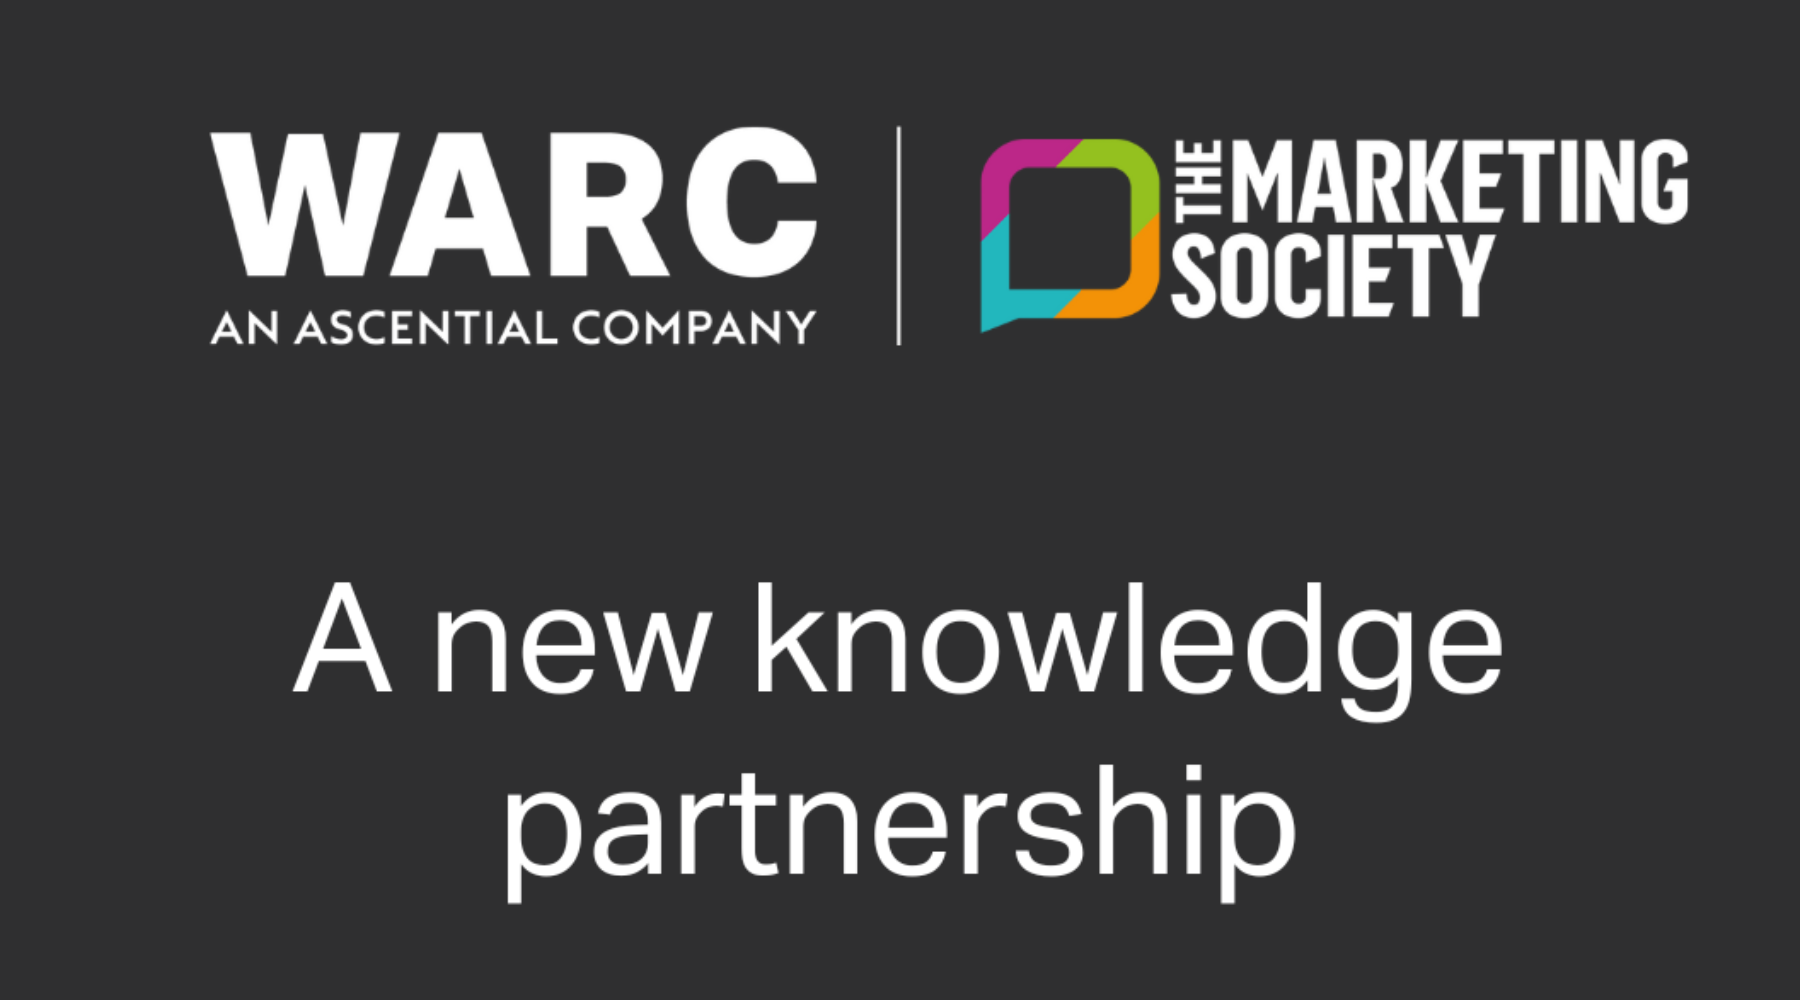 WARC & The Marketing Society Launch The Effective CMO Program